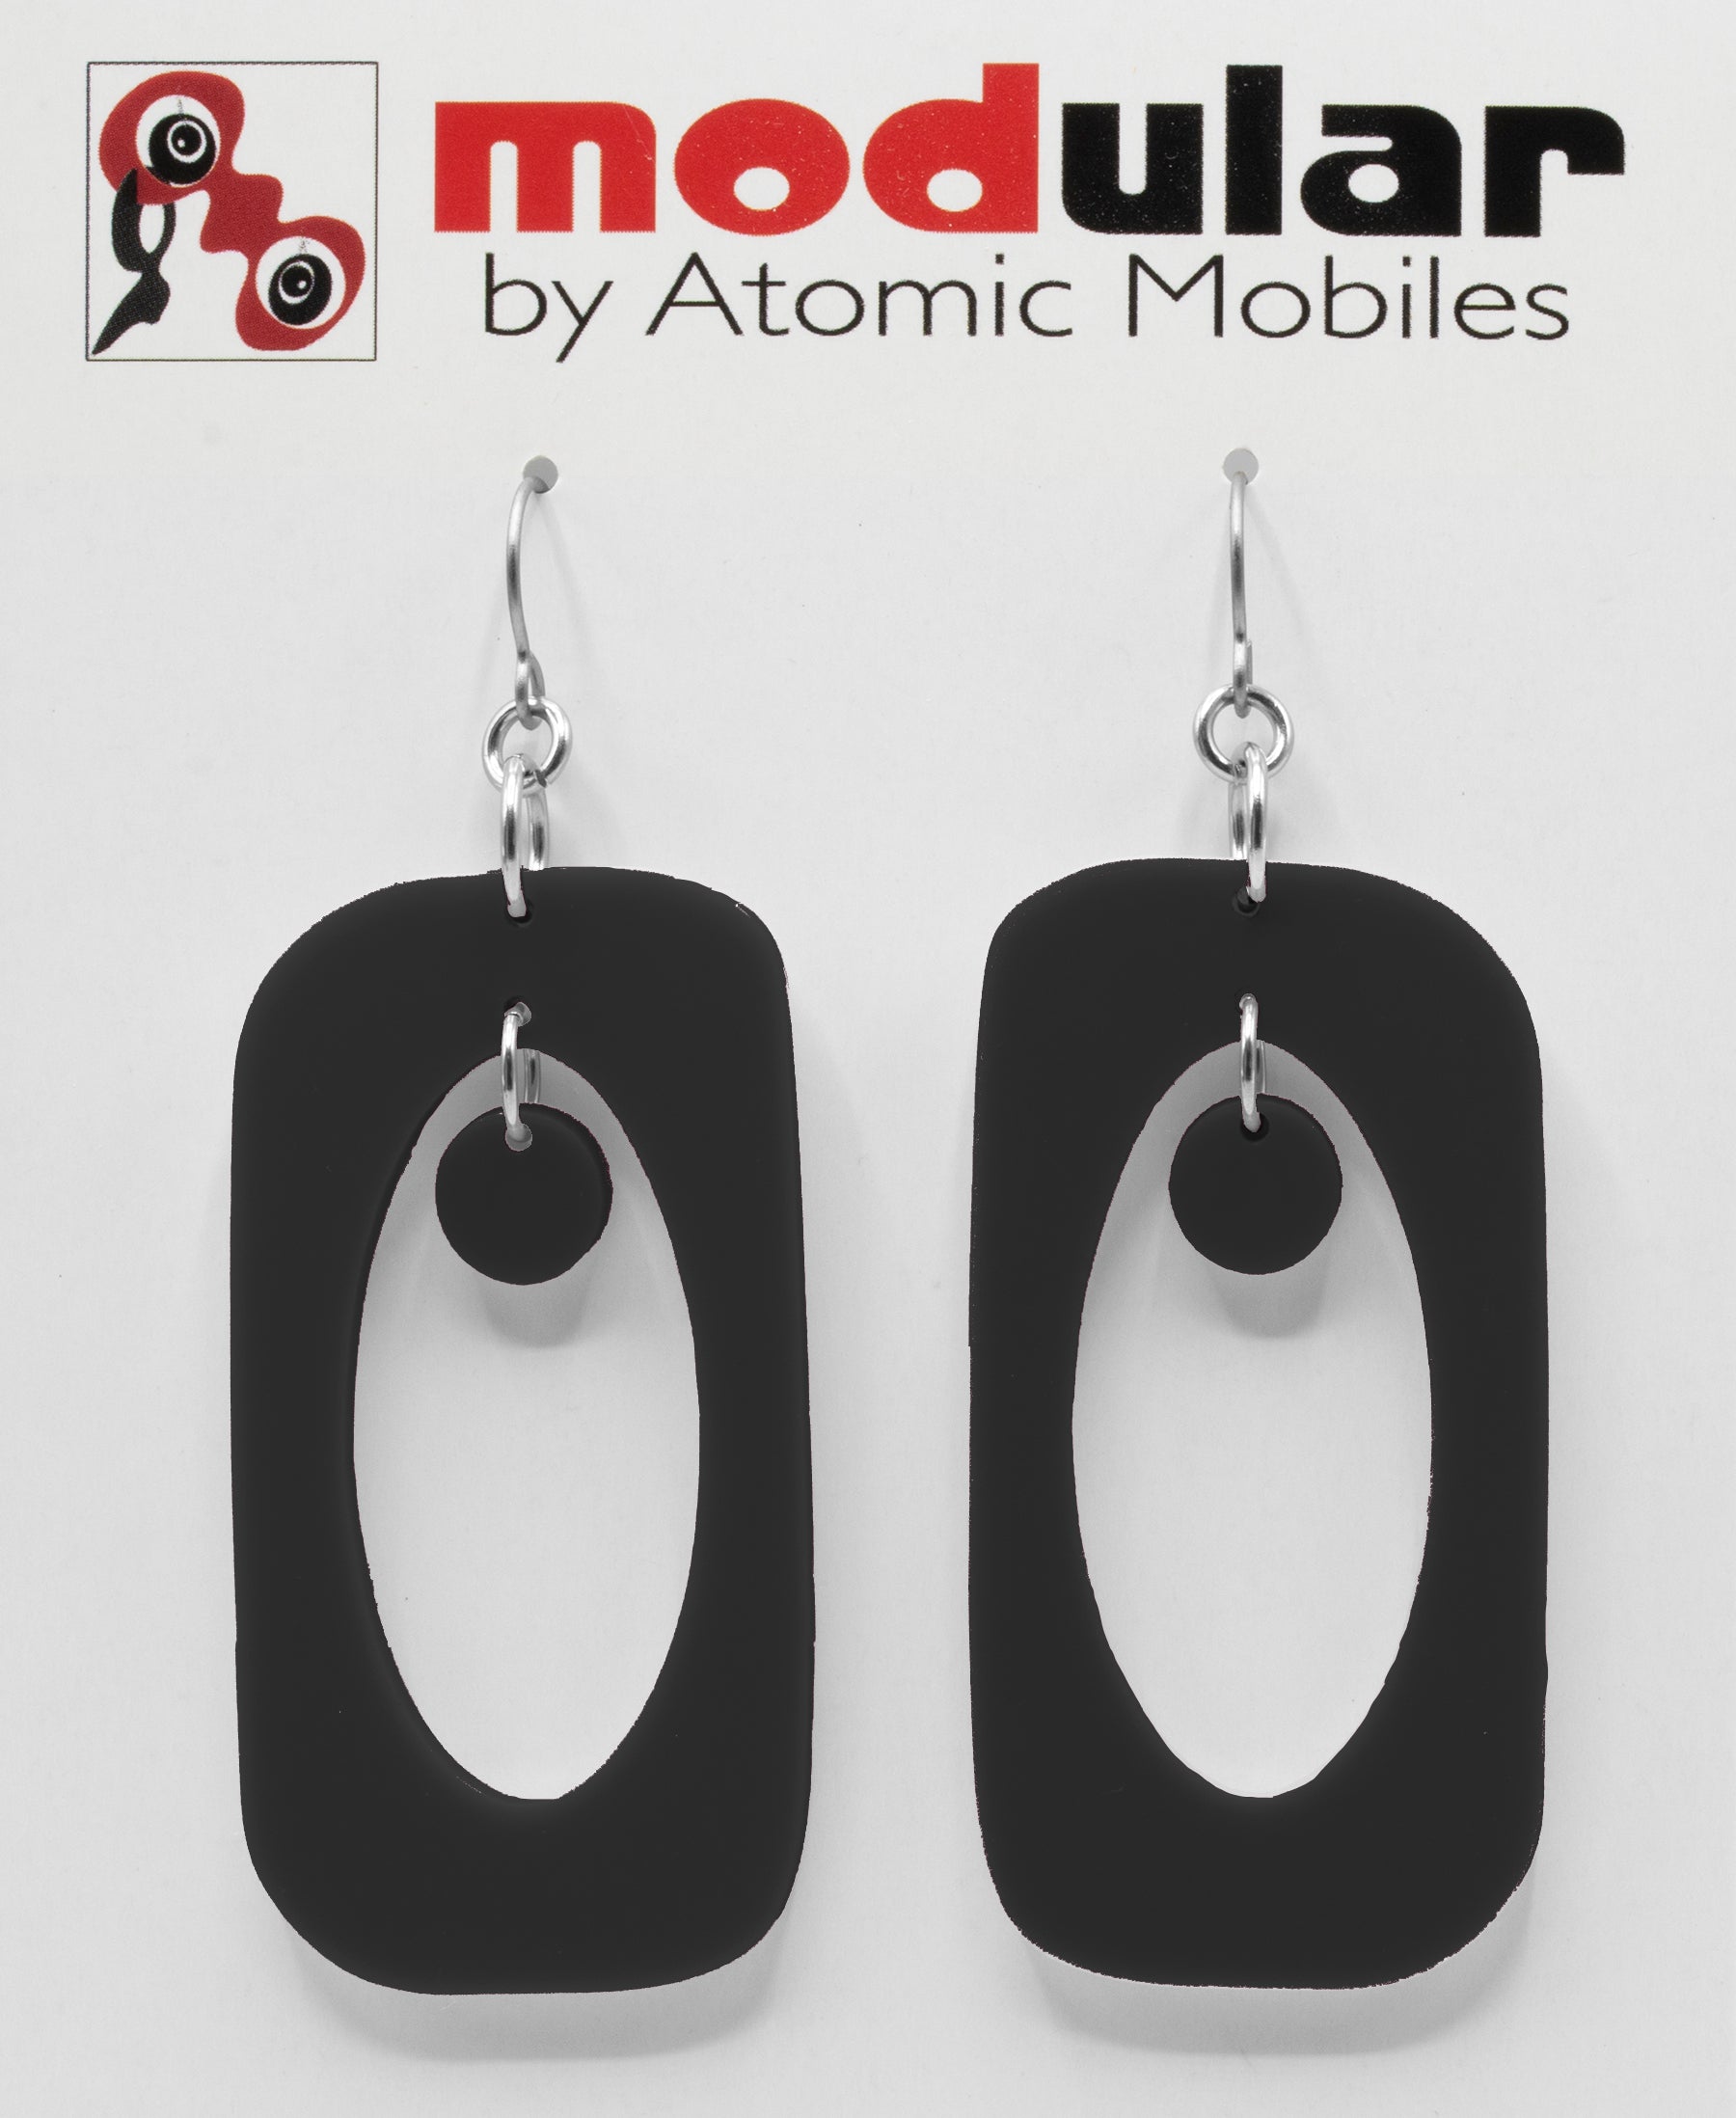 Beatnik Boho Atomic Earrings in Black by AtomicMobiles.com in Bewitching Black - mod retro midcentury inspired jewelry